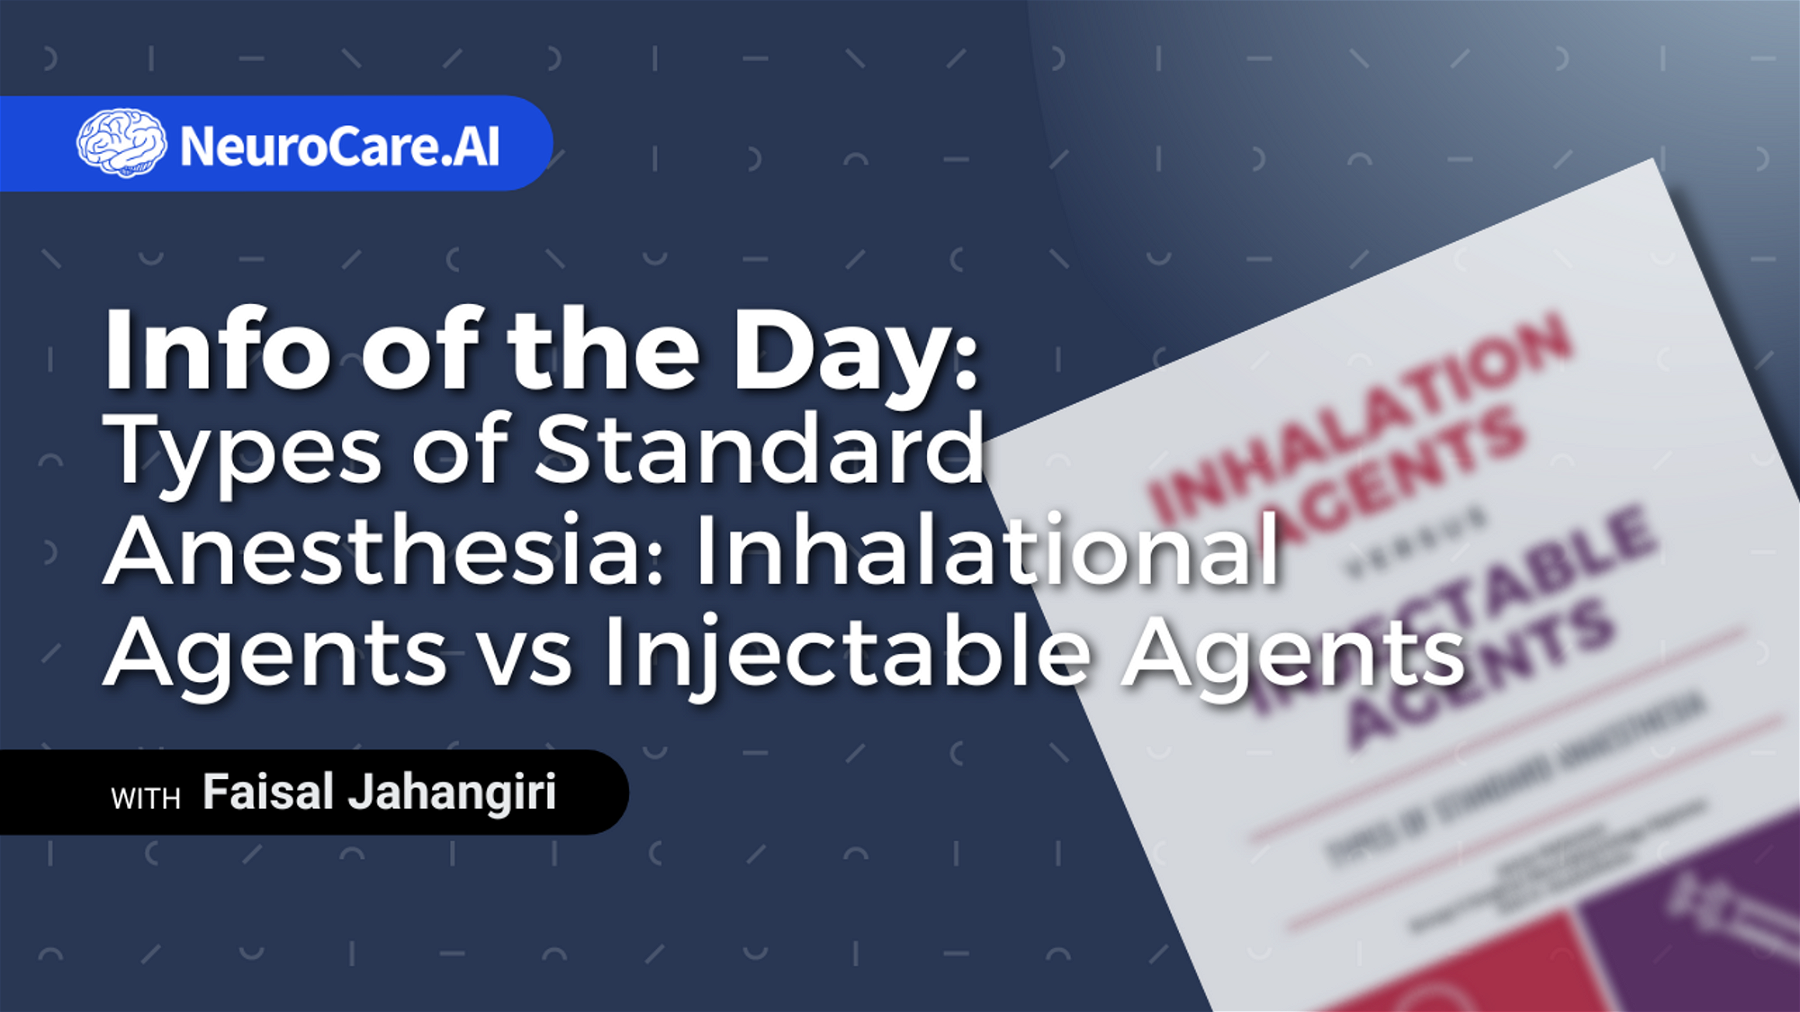 Info of the Day: "Types of Standard Anesthesia: Inhalational Agents vs Injectable Agents"